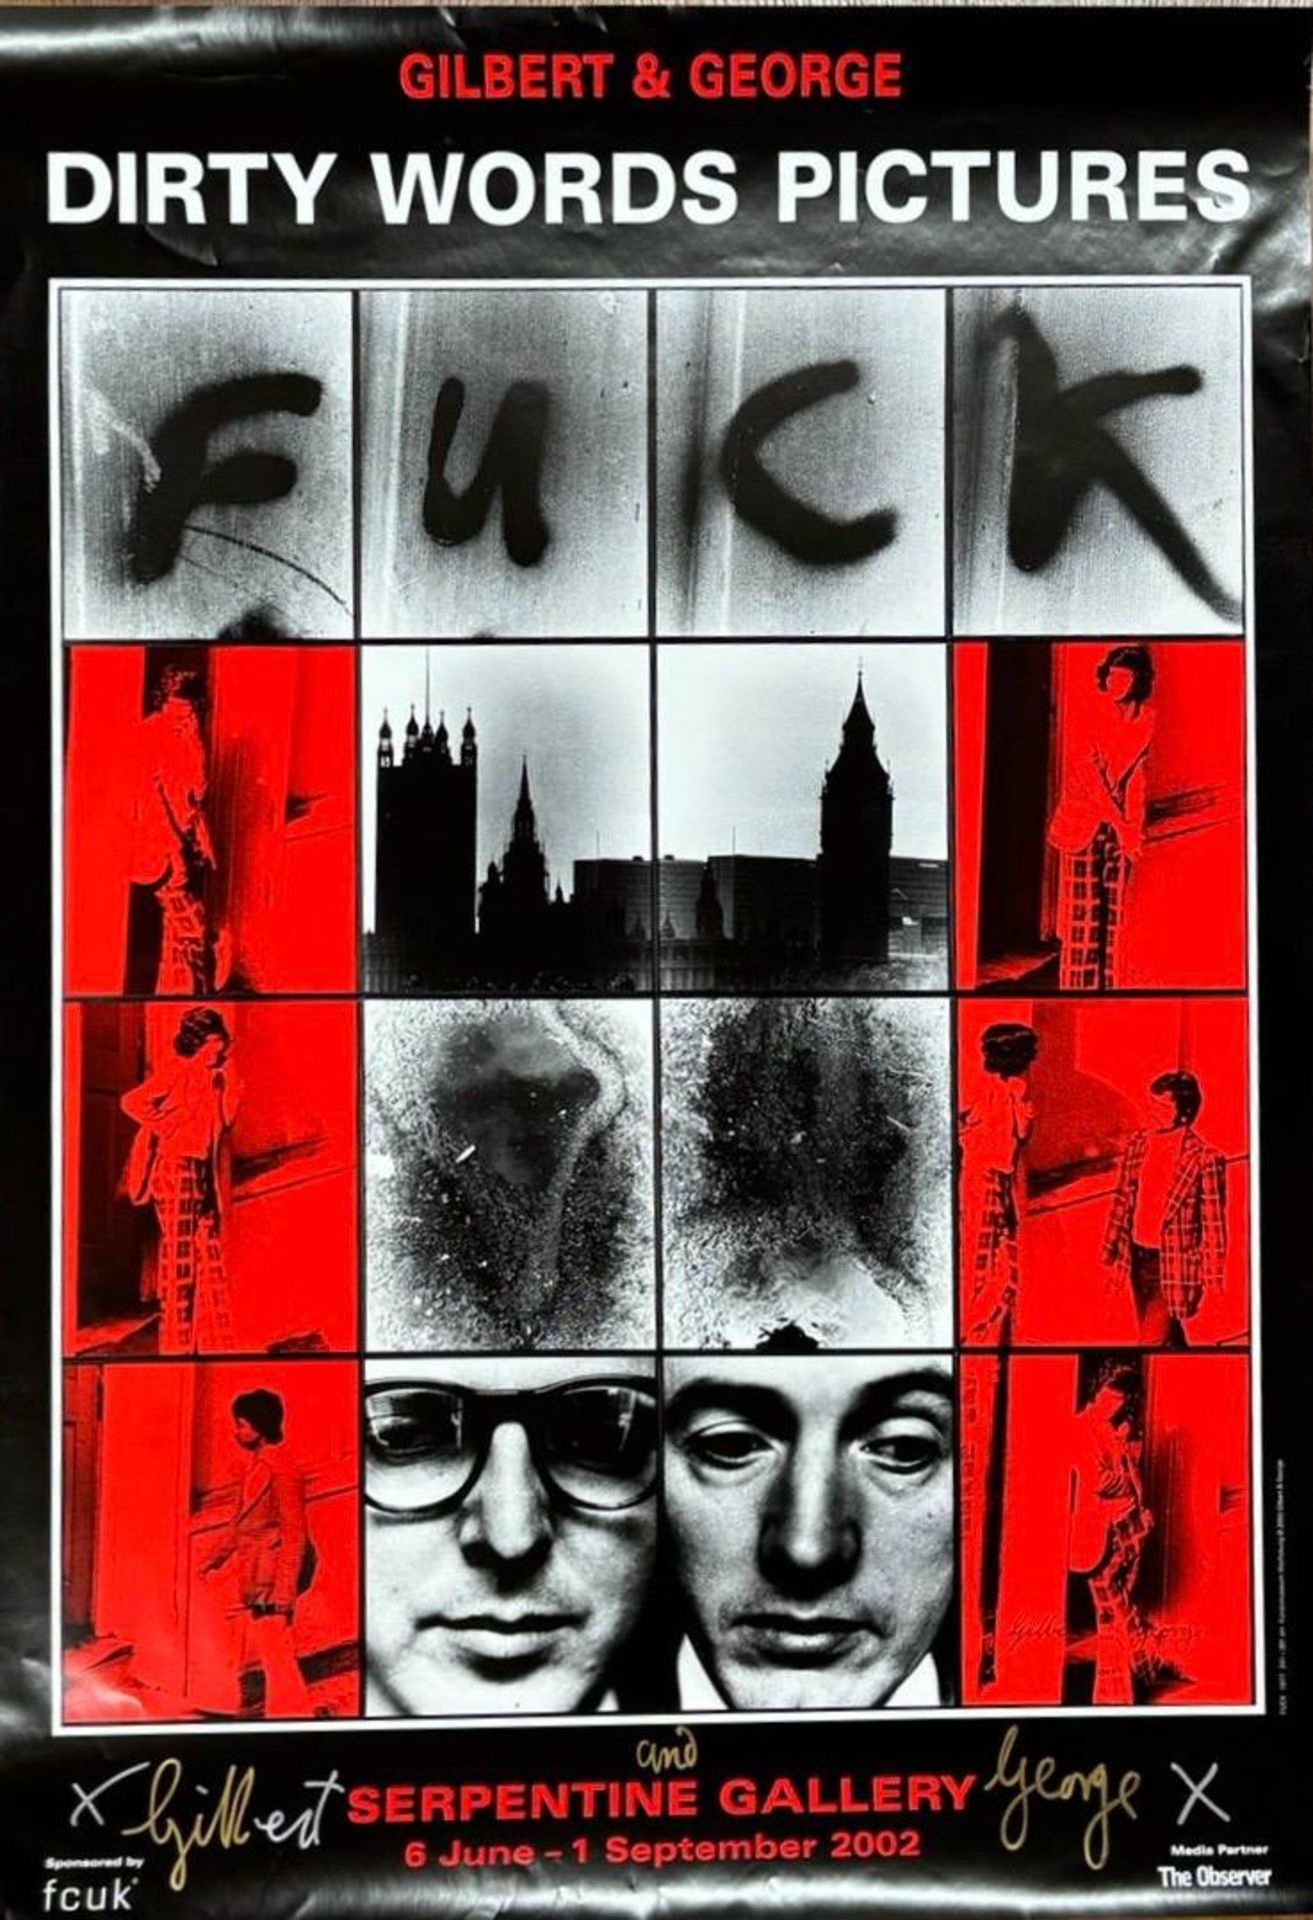 GILBERT & GEORGE - SIGNED DIRTY WORDS 2002 EXHIBITION POSTER